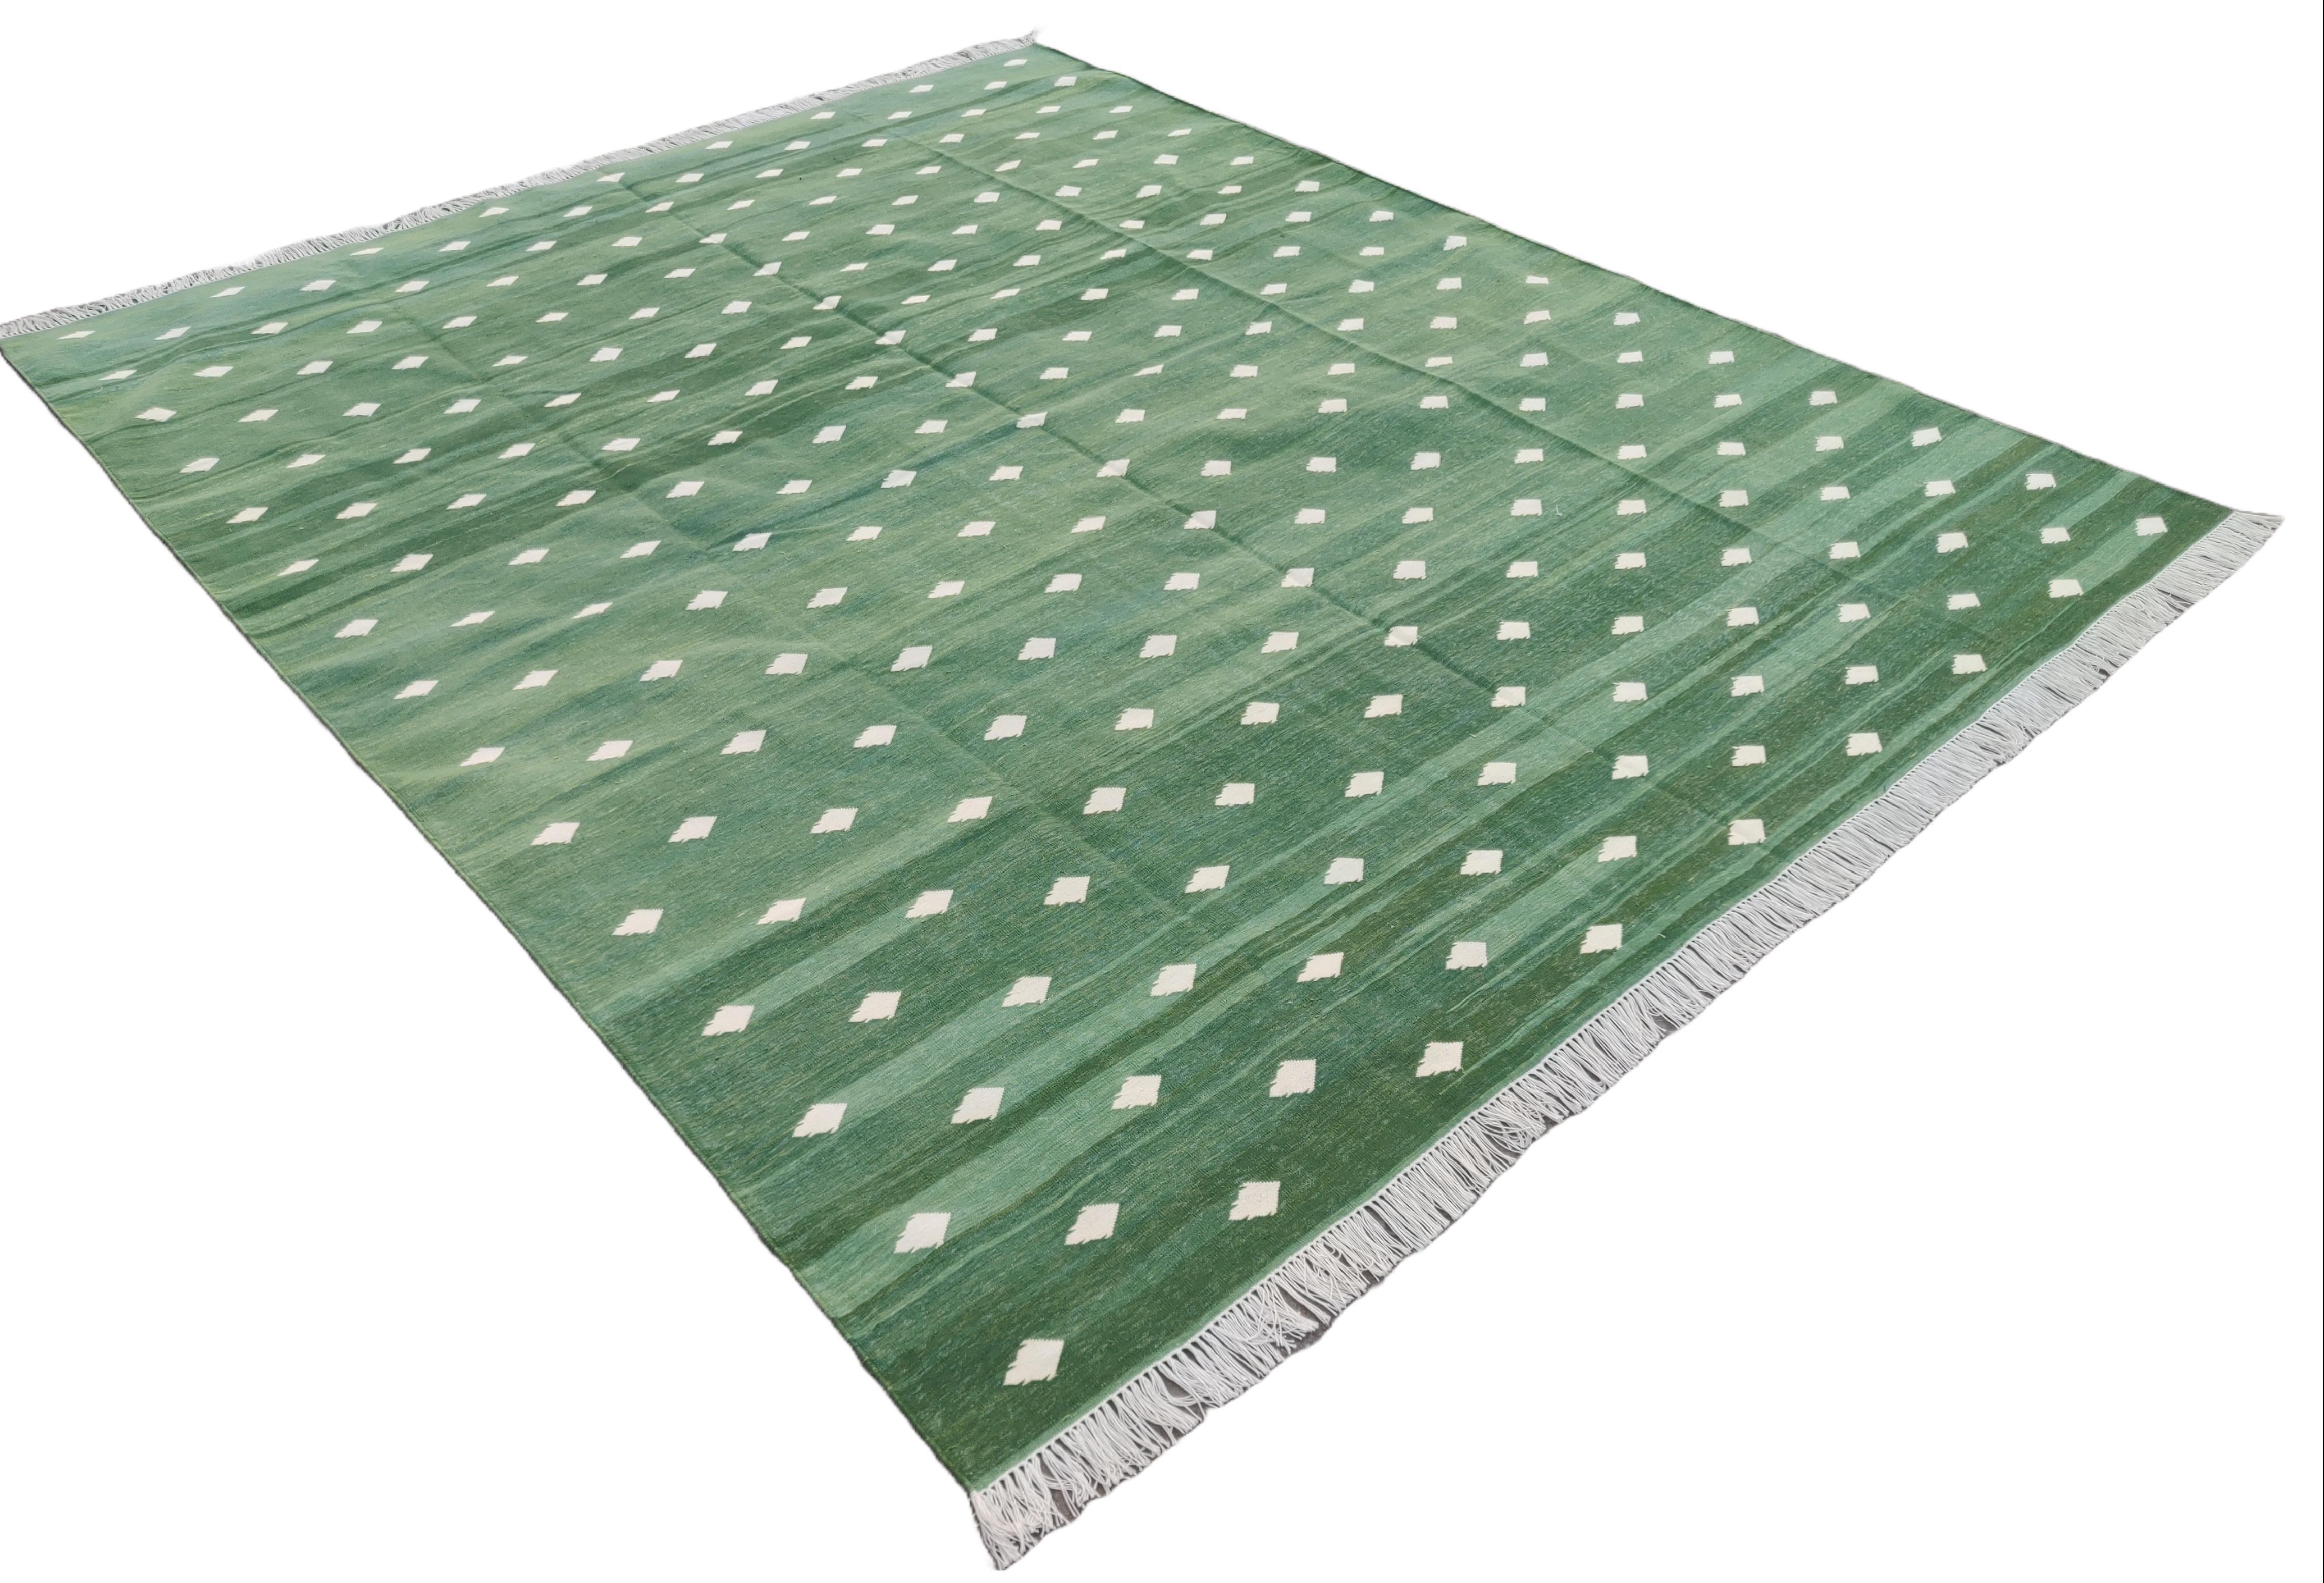 Cotton Natural Vegetable Dyed, Forest Green & White Leaf Patterned Rug-8'x10'
These special flat-weave dhurries are hand-woven with 15 ply 100% cotton yarn. Due to the special manufacturing techniques used to create our rugs, the size and color of